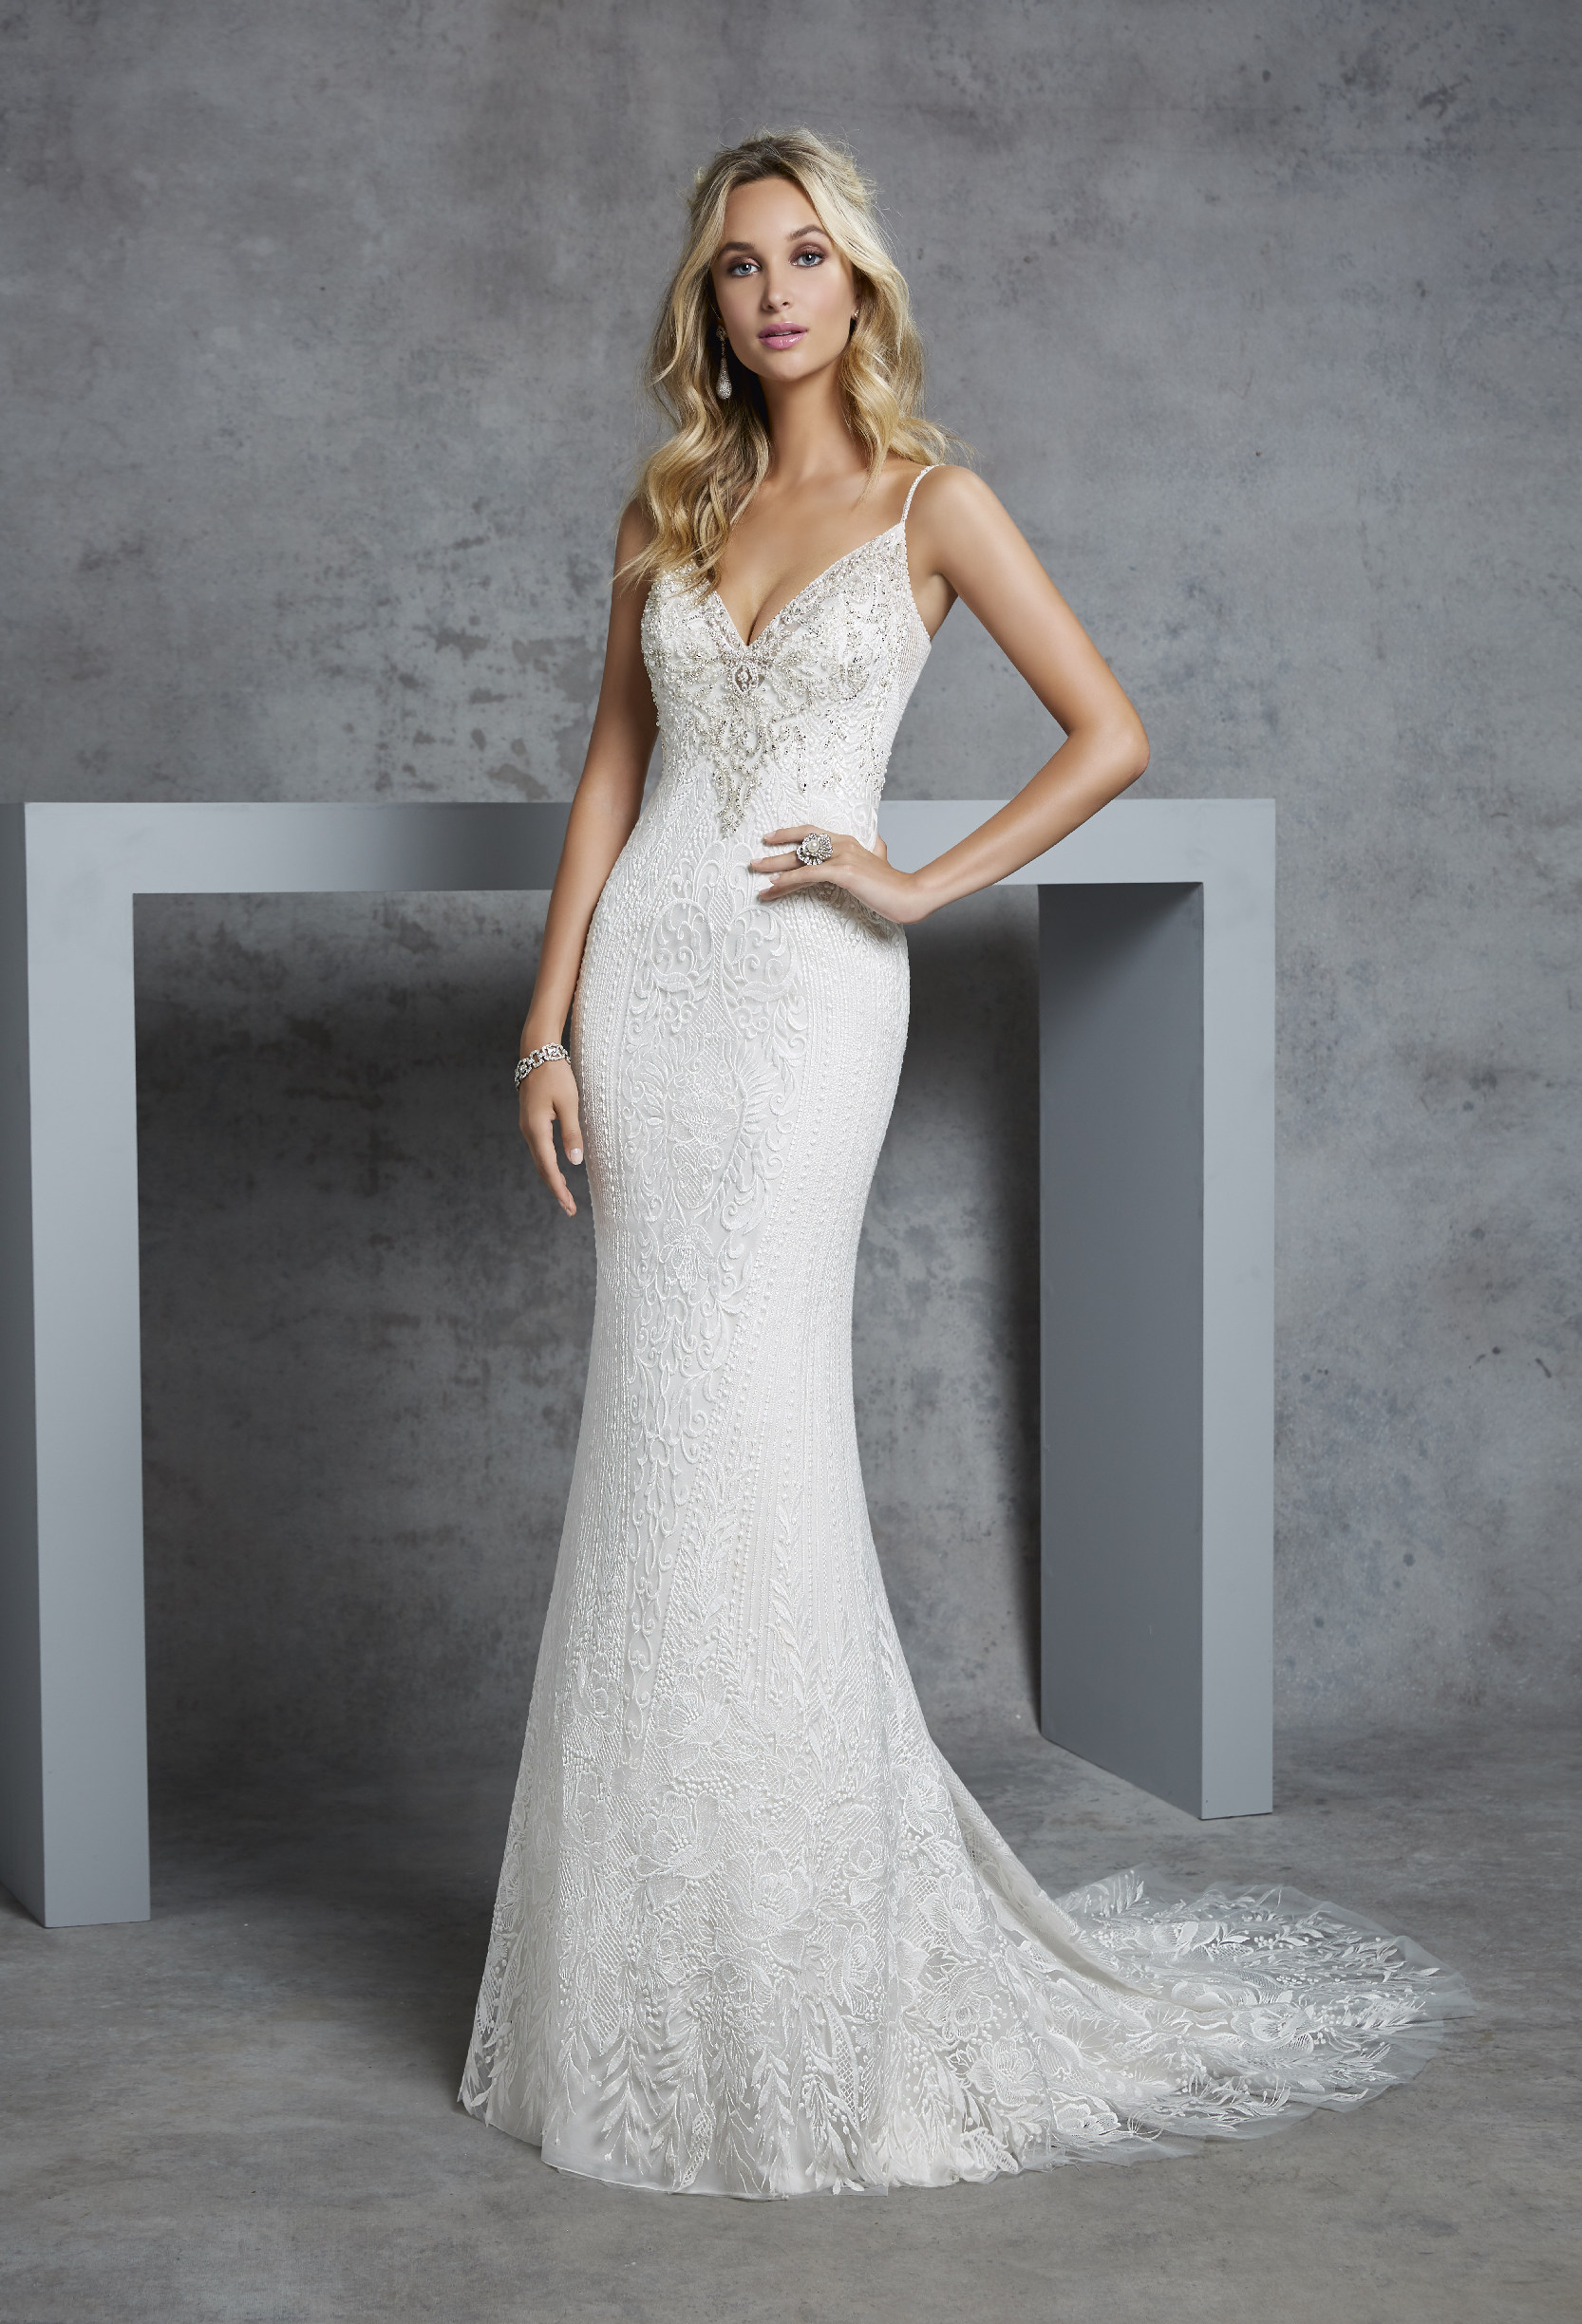 Model in Ronald Joyce 69409, a lace sheath wedding dress silhouette with delicate beaded straps, a silver beaded bust, modern v-neckline and lace puddle train